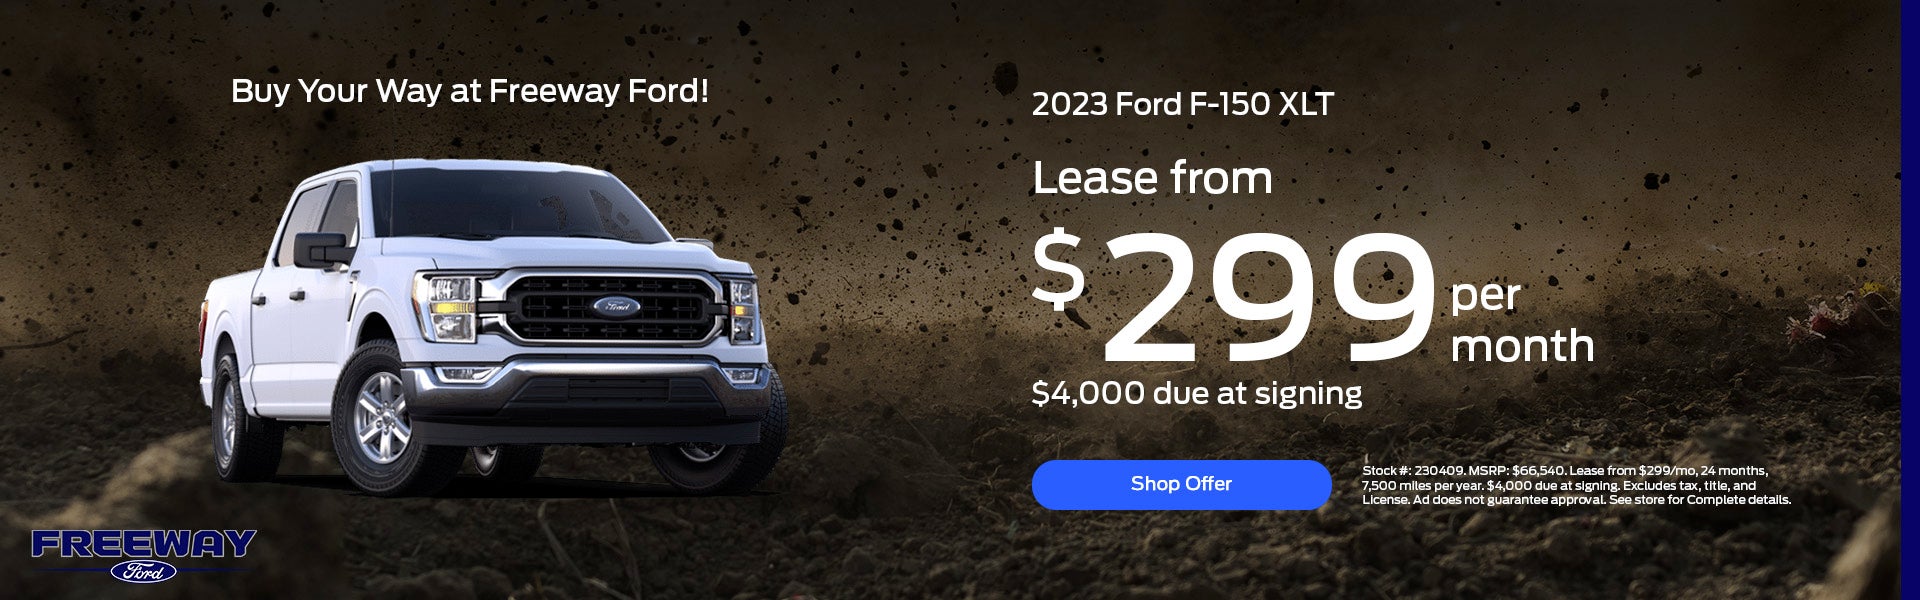 2023 F-150 XLT Lease